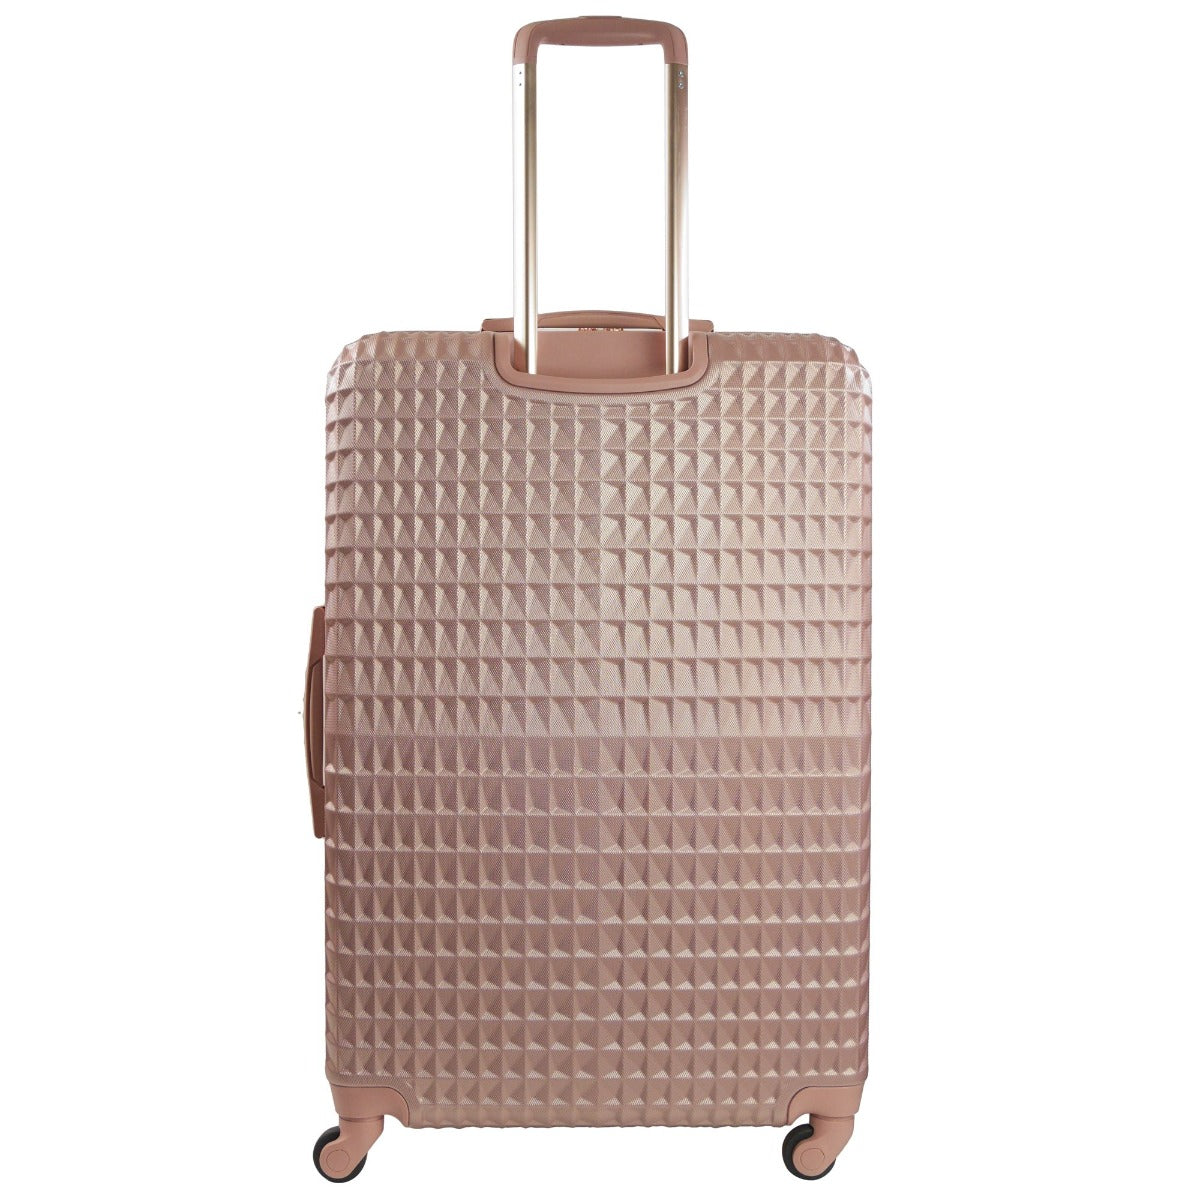 Ful Geo 31" Hard-sided Spinner Suitcase Luggage Rose Gold Large Check-in Baggage